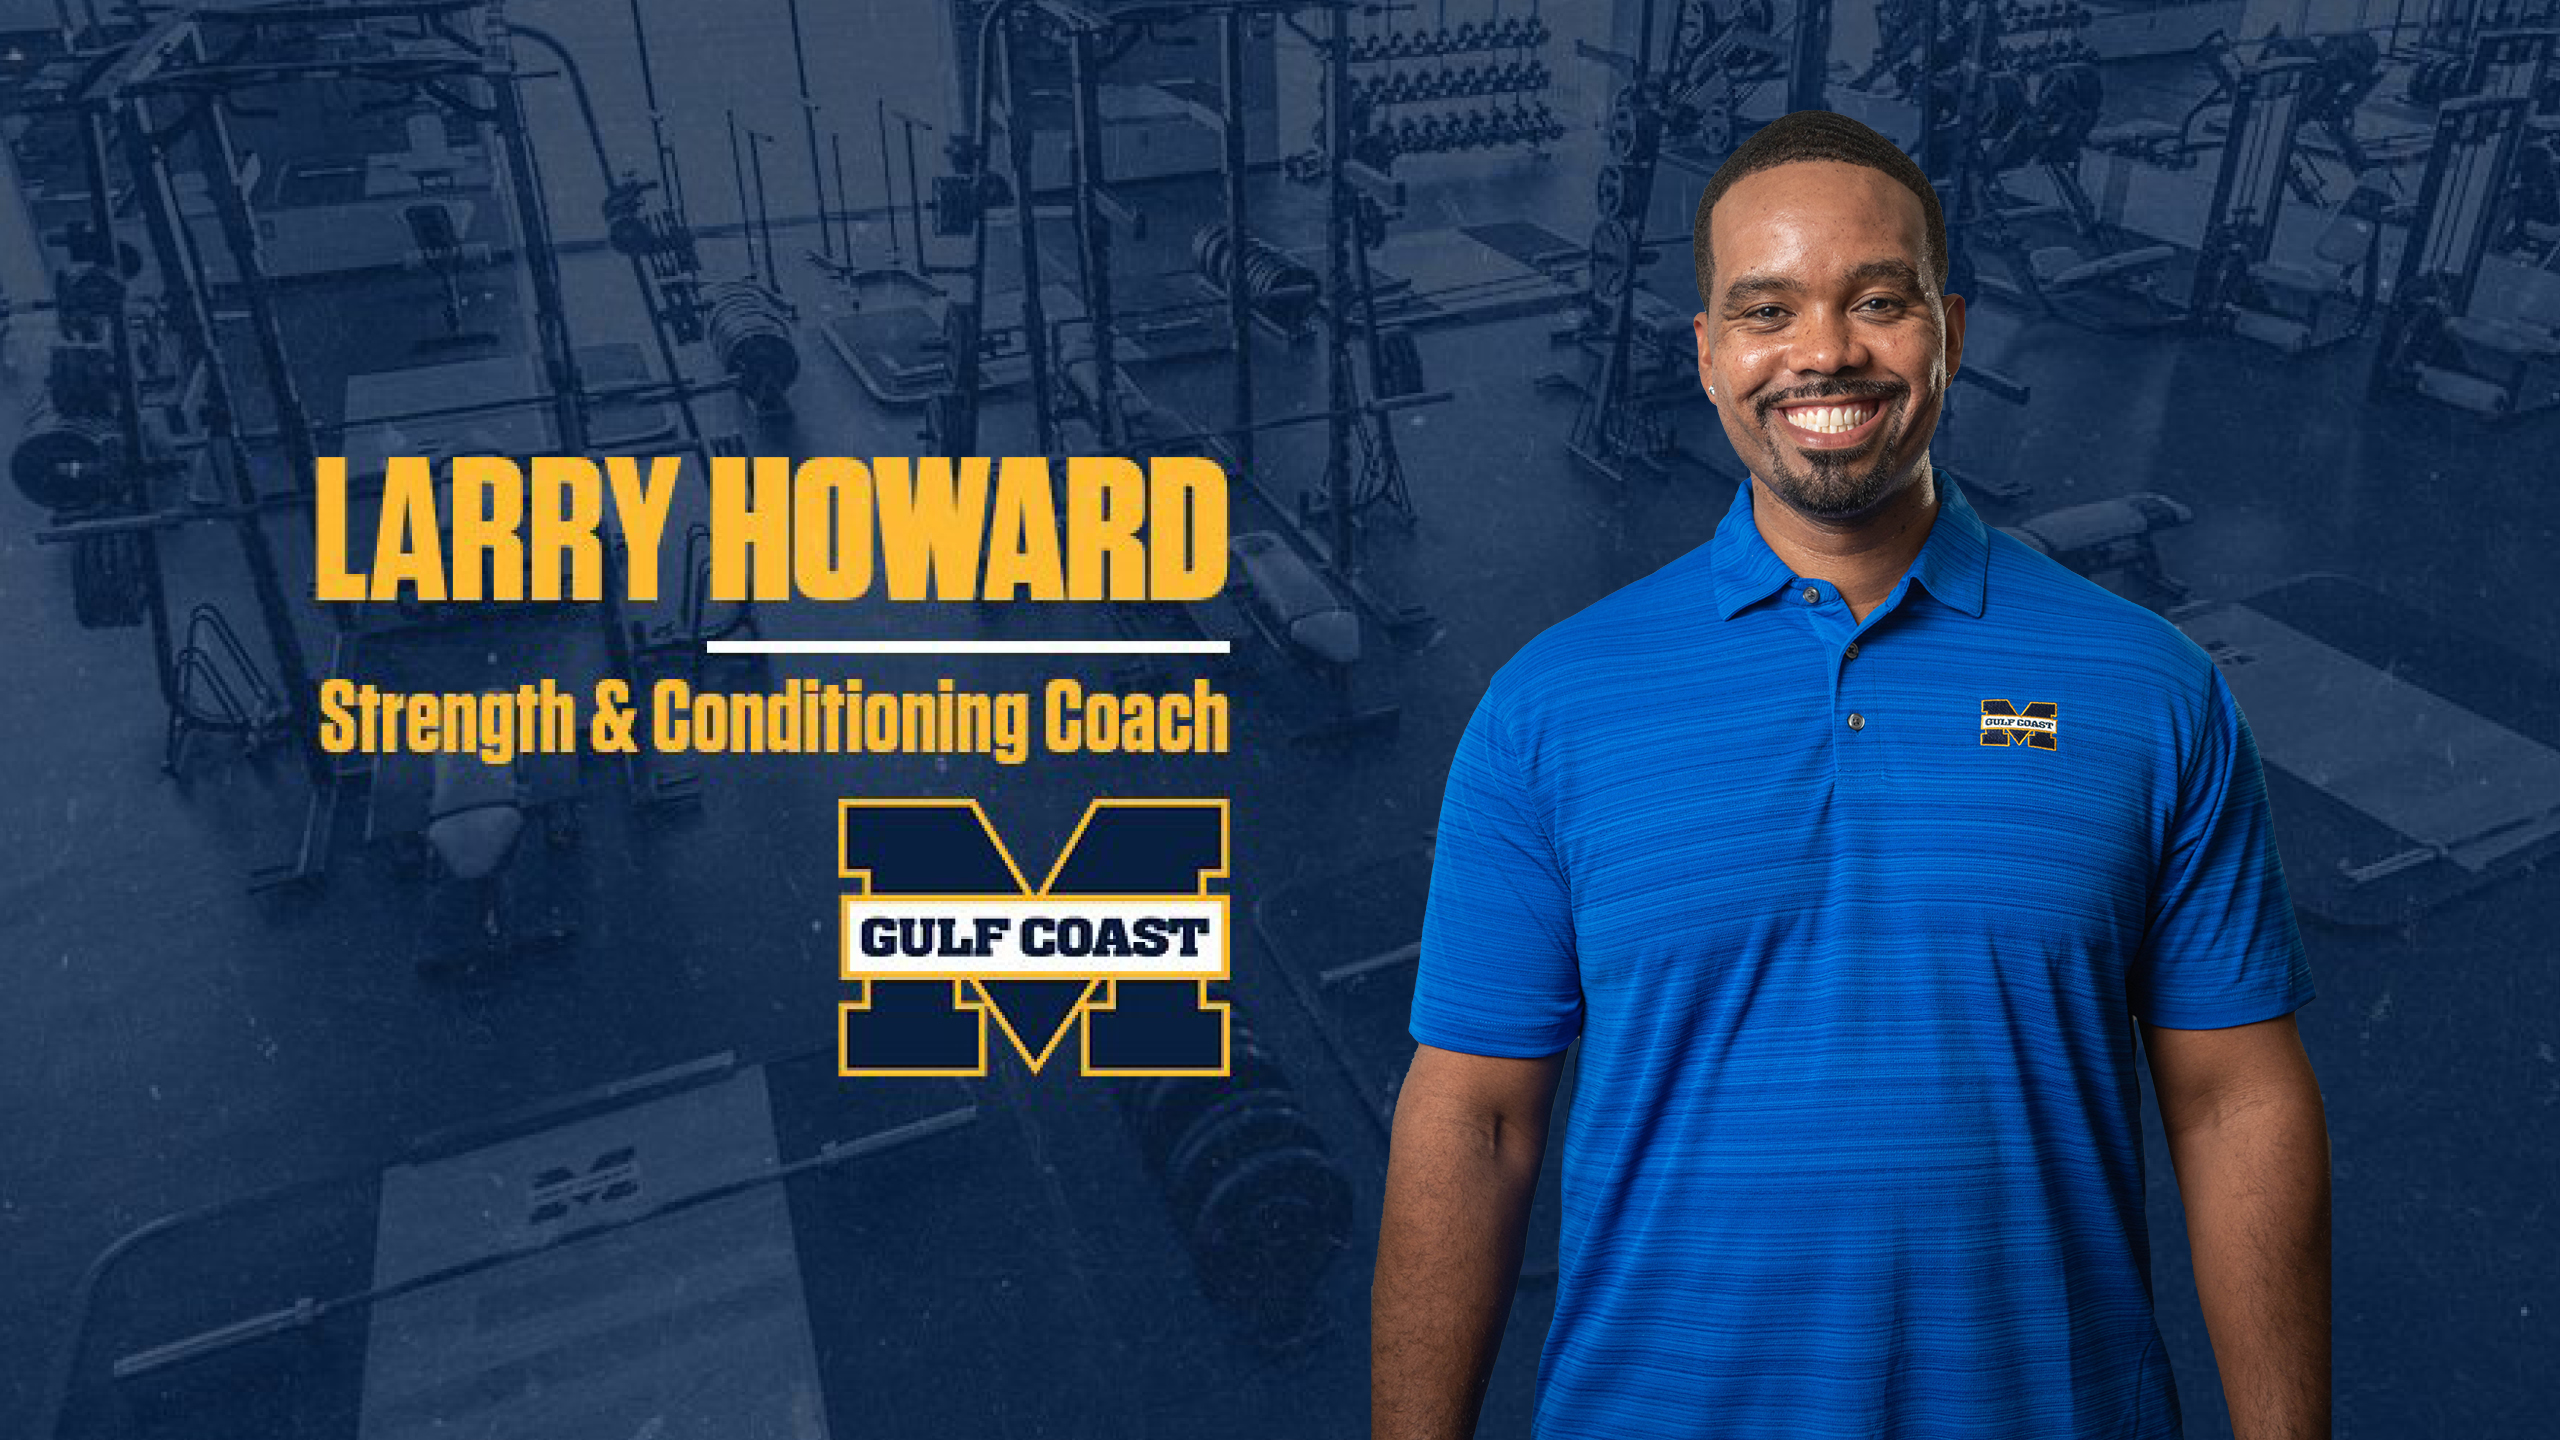 Howard is MGCCC’s 1st strength coach